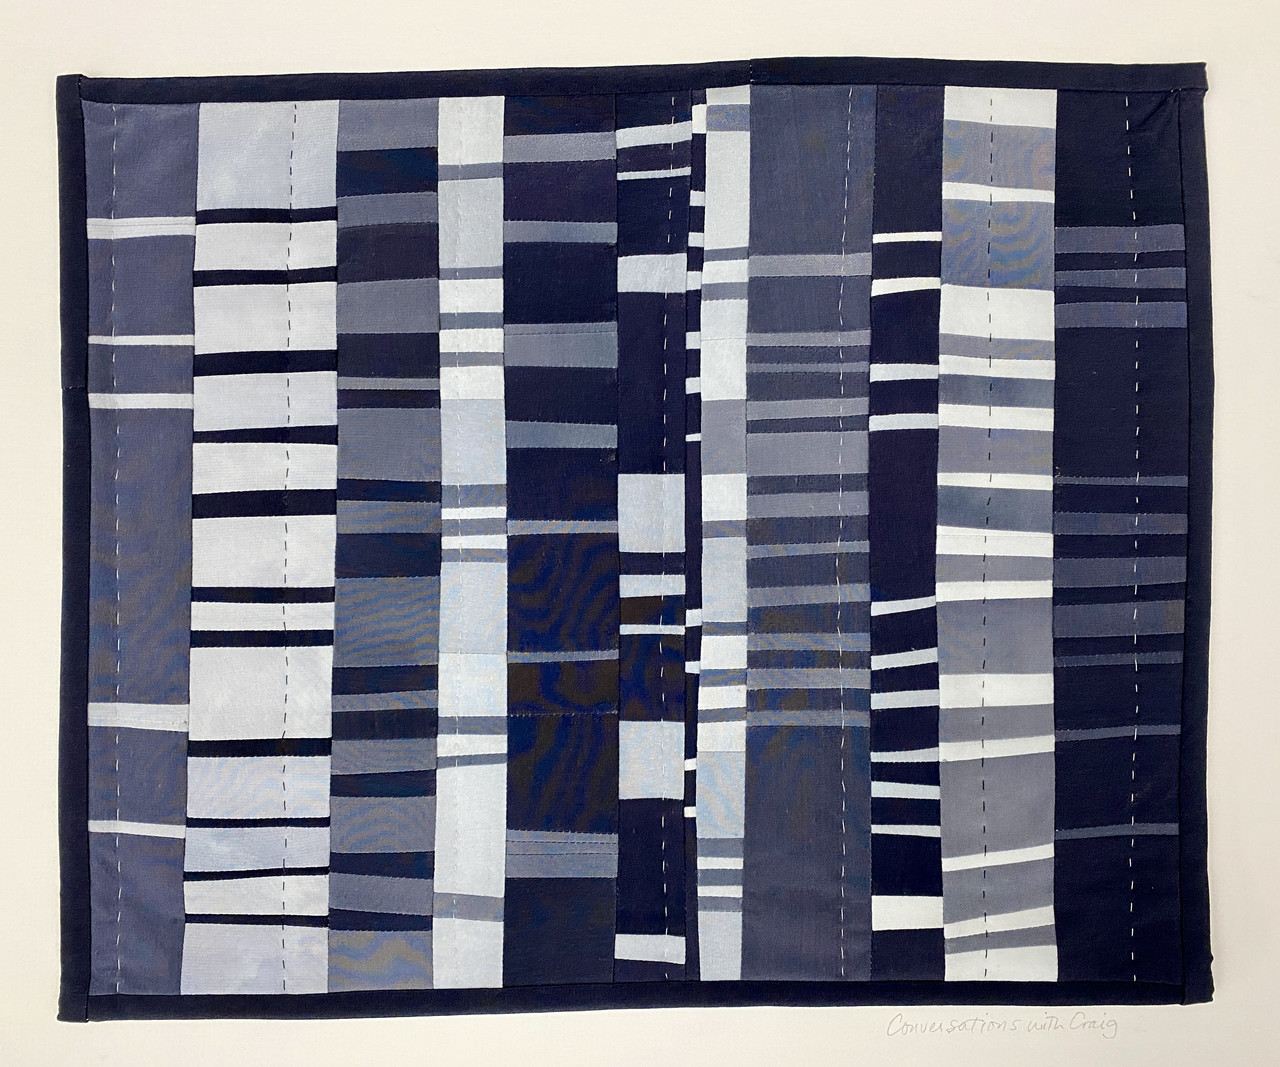 Photograph of a small fabric quilt. The fabric is in hues of black, greys, and white, done in vertical columns with bits of opposite colors in horizontal lines within those columns.